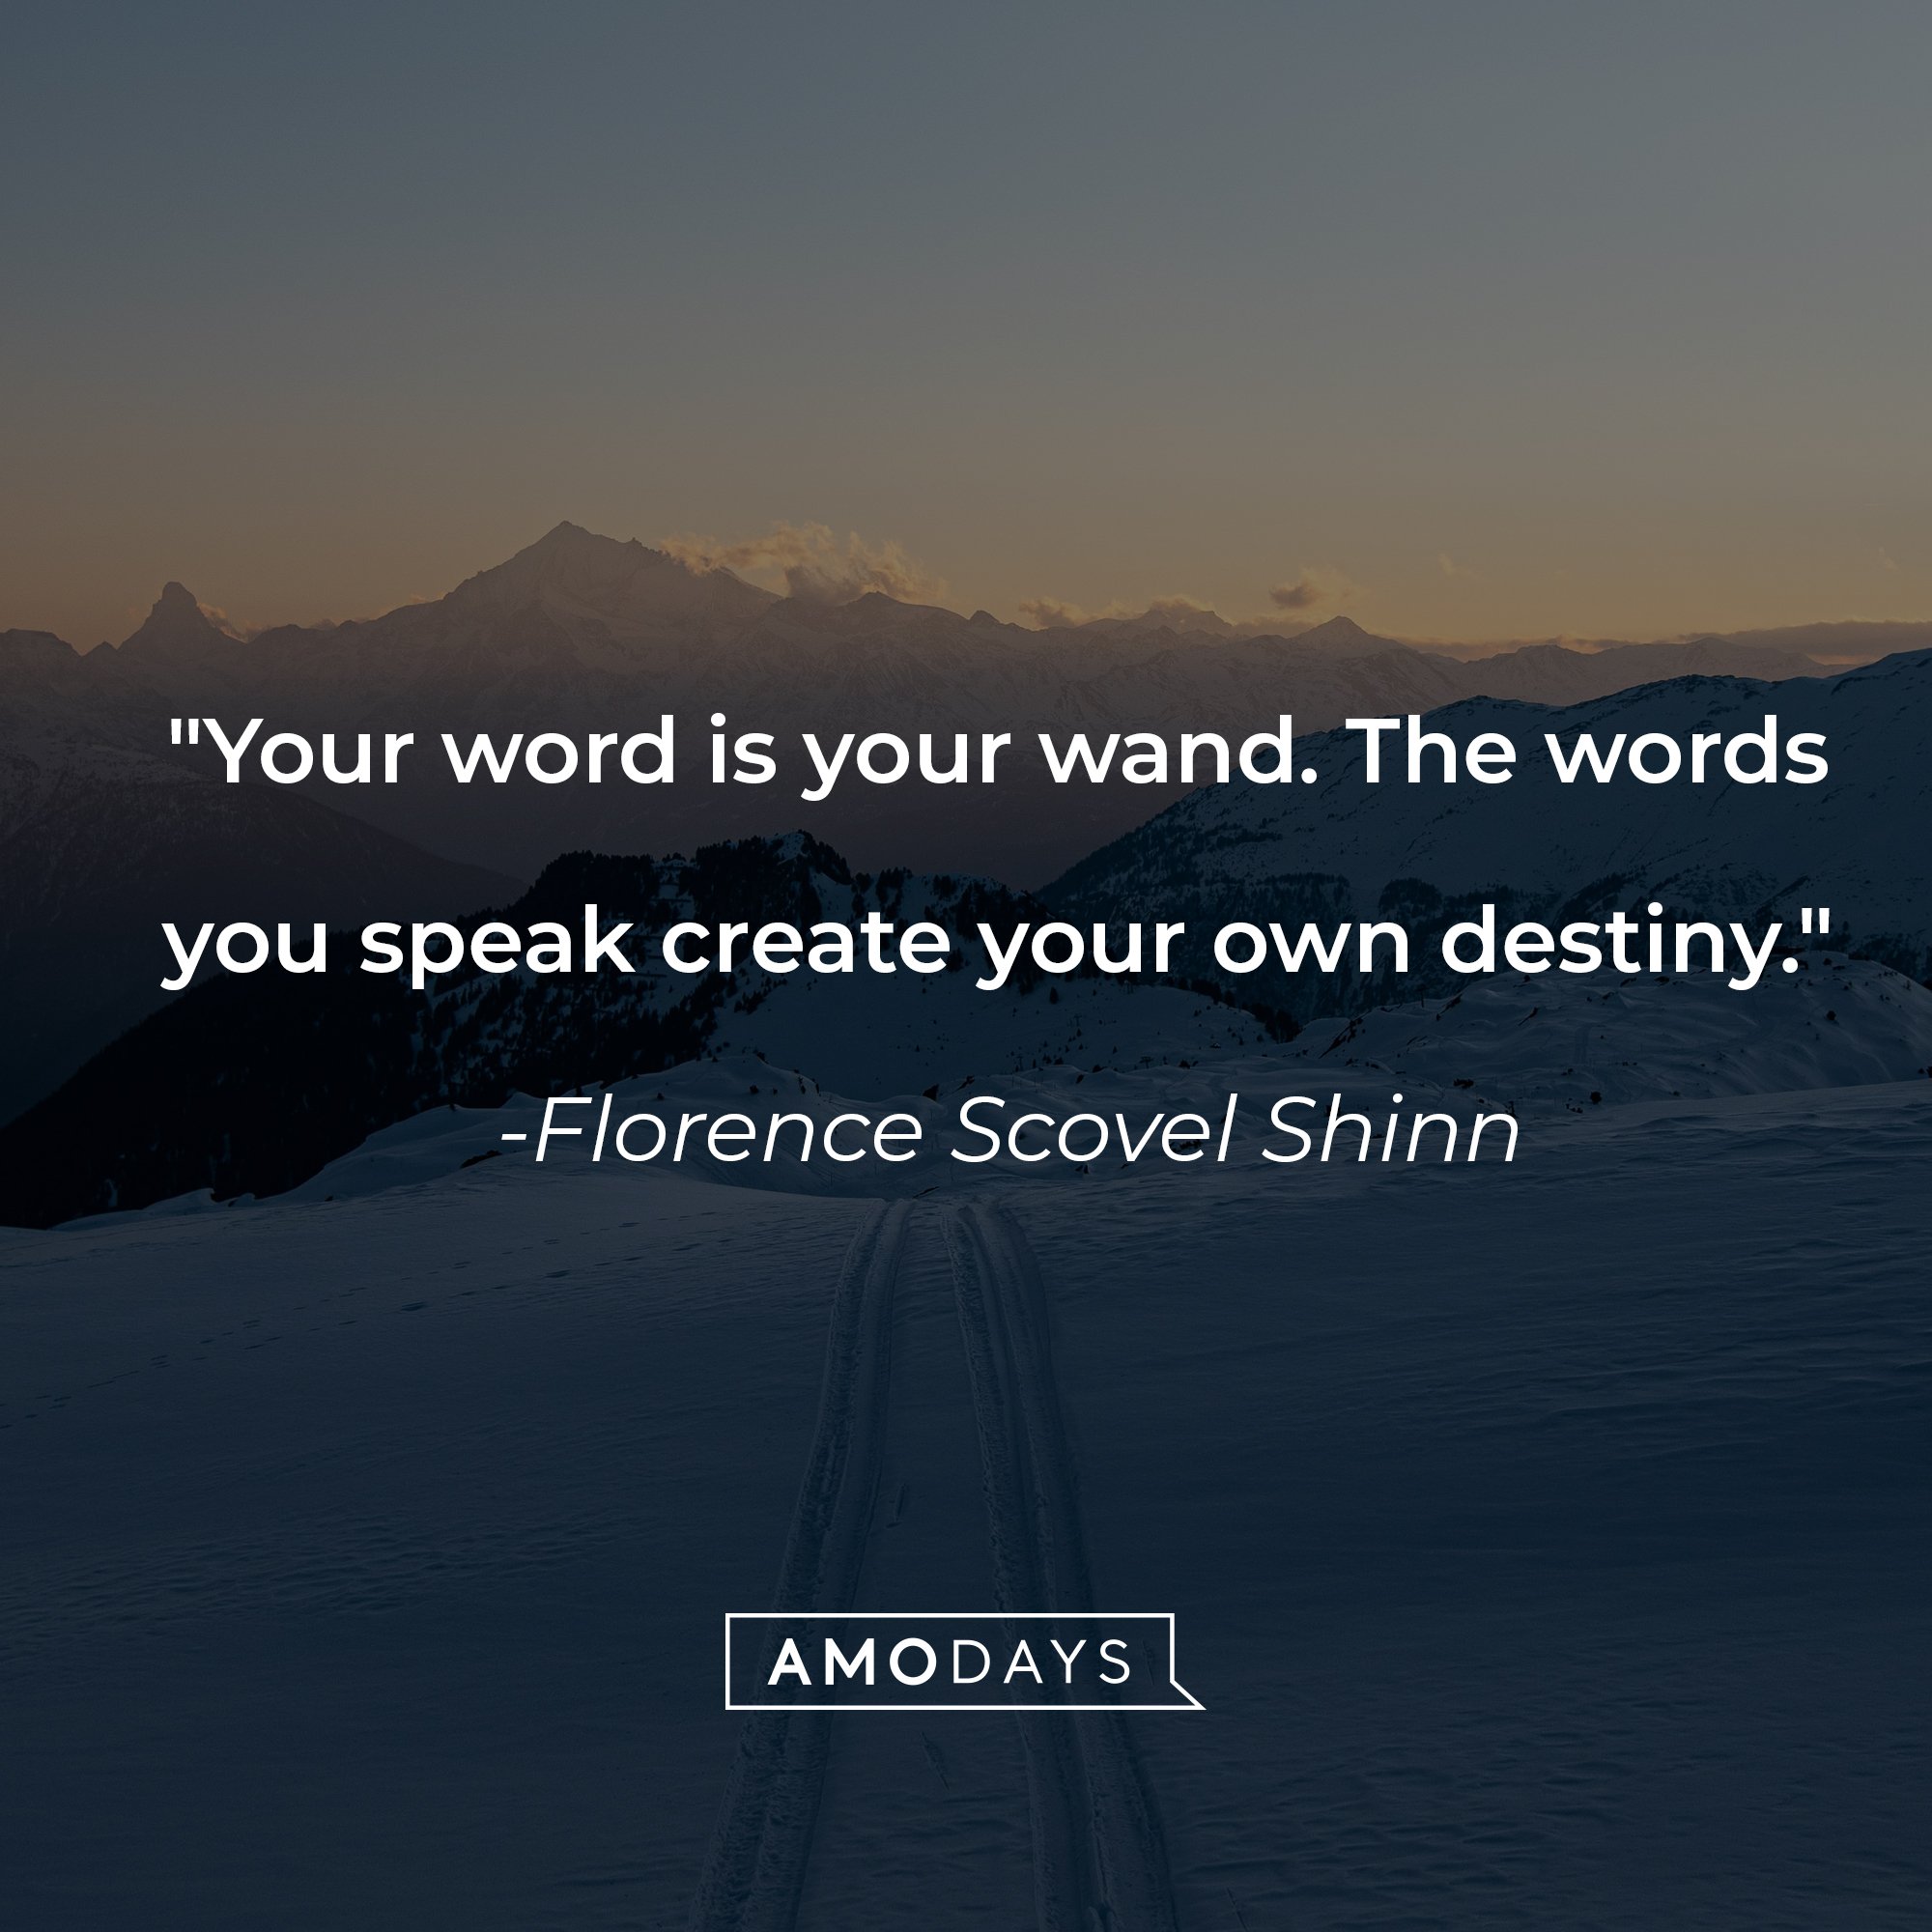 Florence Scovel Shinn's quote: "Your word is your wand. The words you speak create your own destiny." | Image: AmoDays 